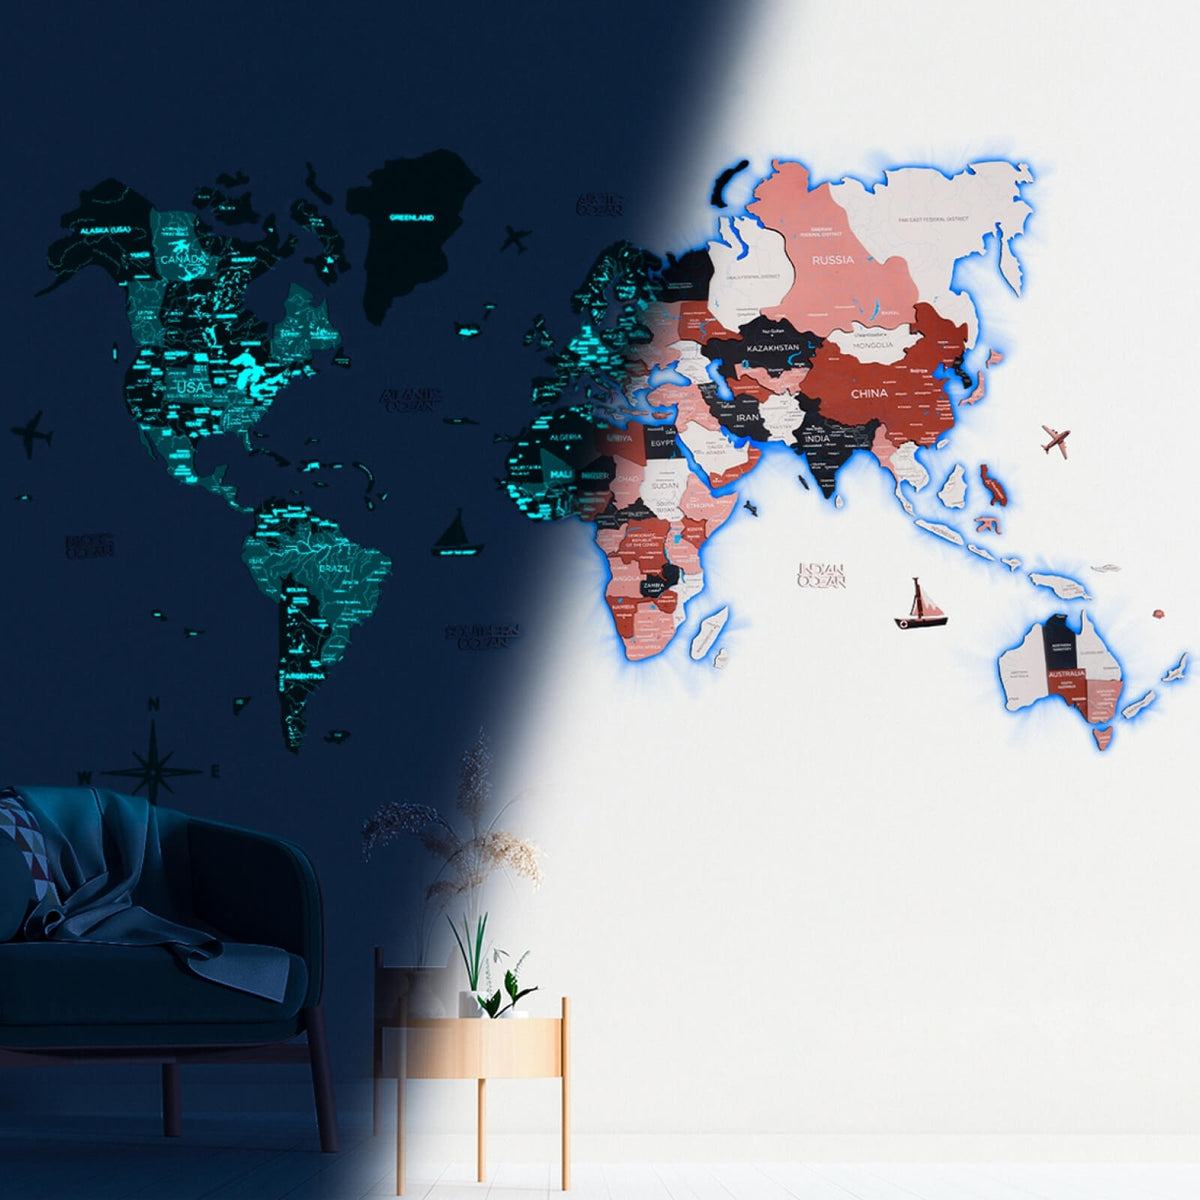 3D Luminous LED Colored World Map from Enjoy The Wood ‣ Good Price, Reviews